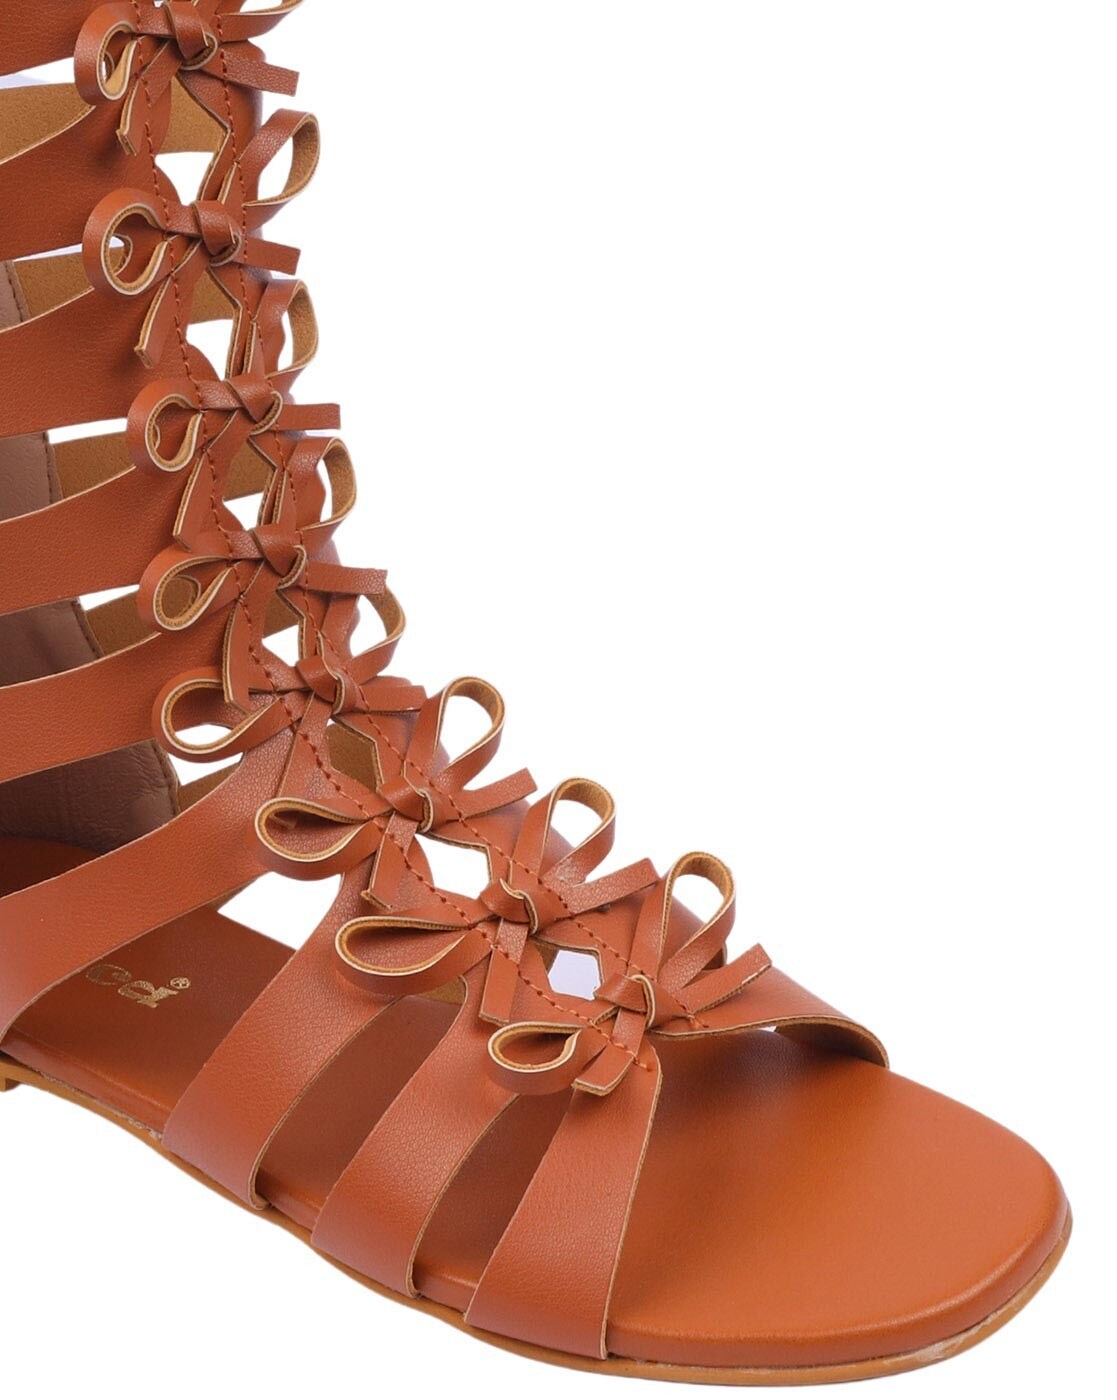 Sh India Tan Leather - Sandals from Moda in Pelle UK